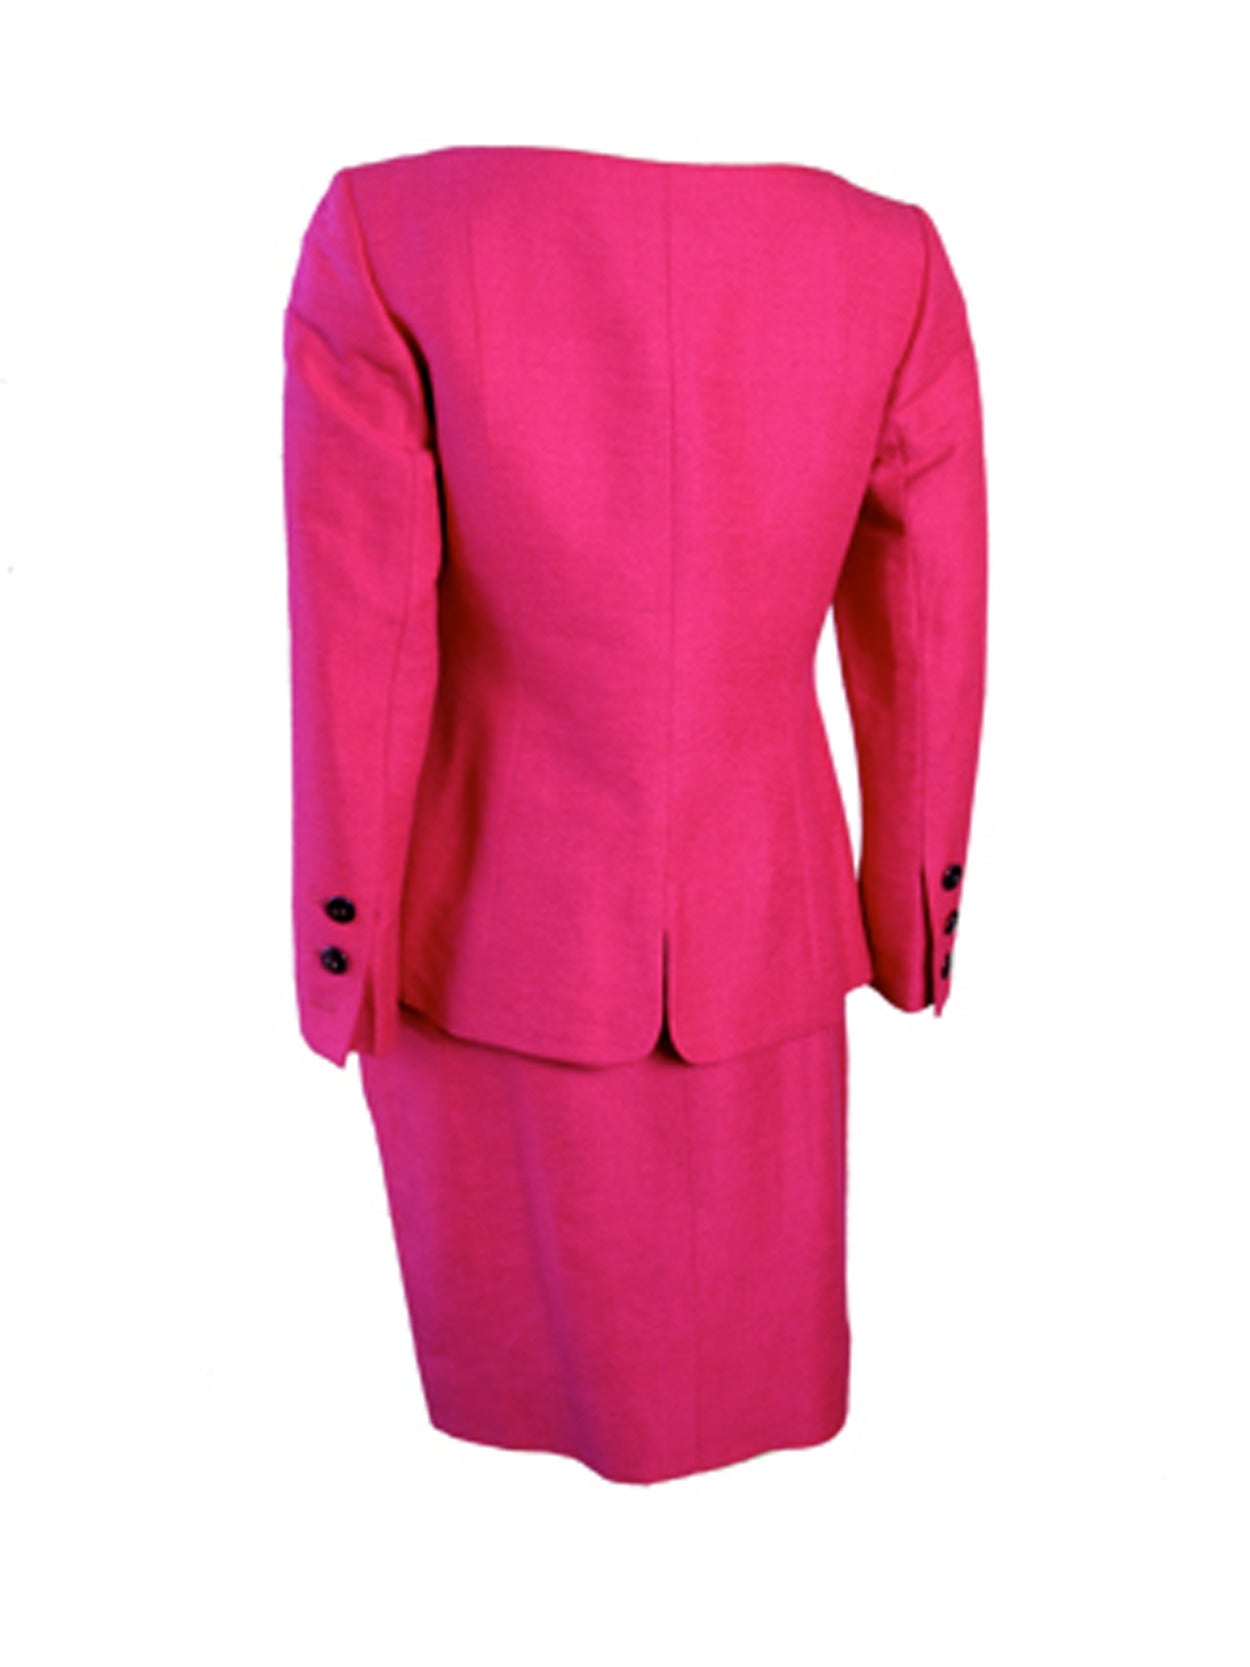 Vintage Yves Saint Laurent hot pink silk suit.36" bust, 33"waist, 22" sleeve, 15"shoulder. Skirt: 27"waist, 21" length. Condition: Very good, one button missing on sleeve. Size 40

We offer returns for refund, please